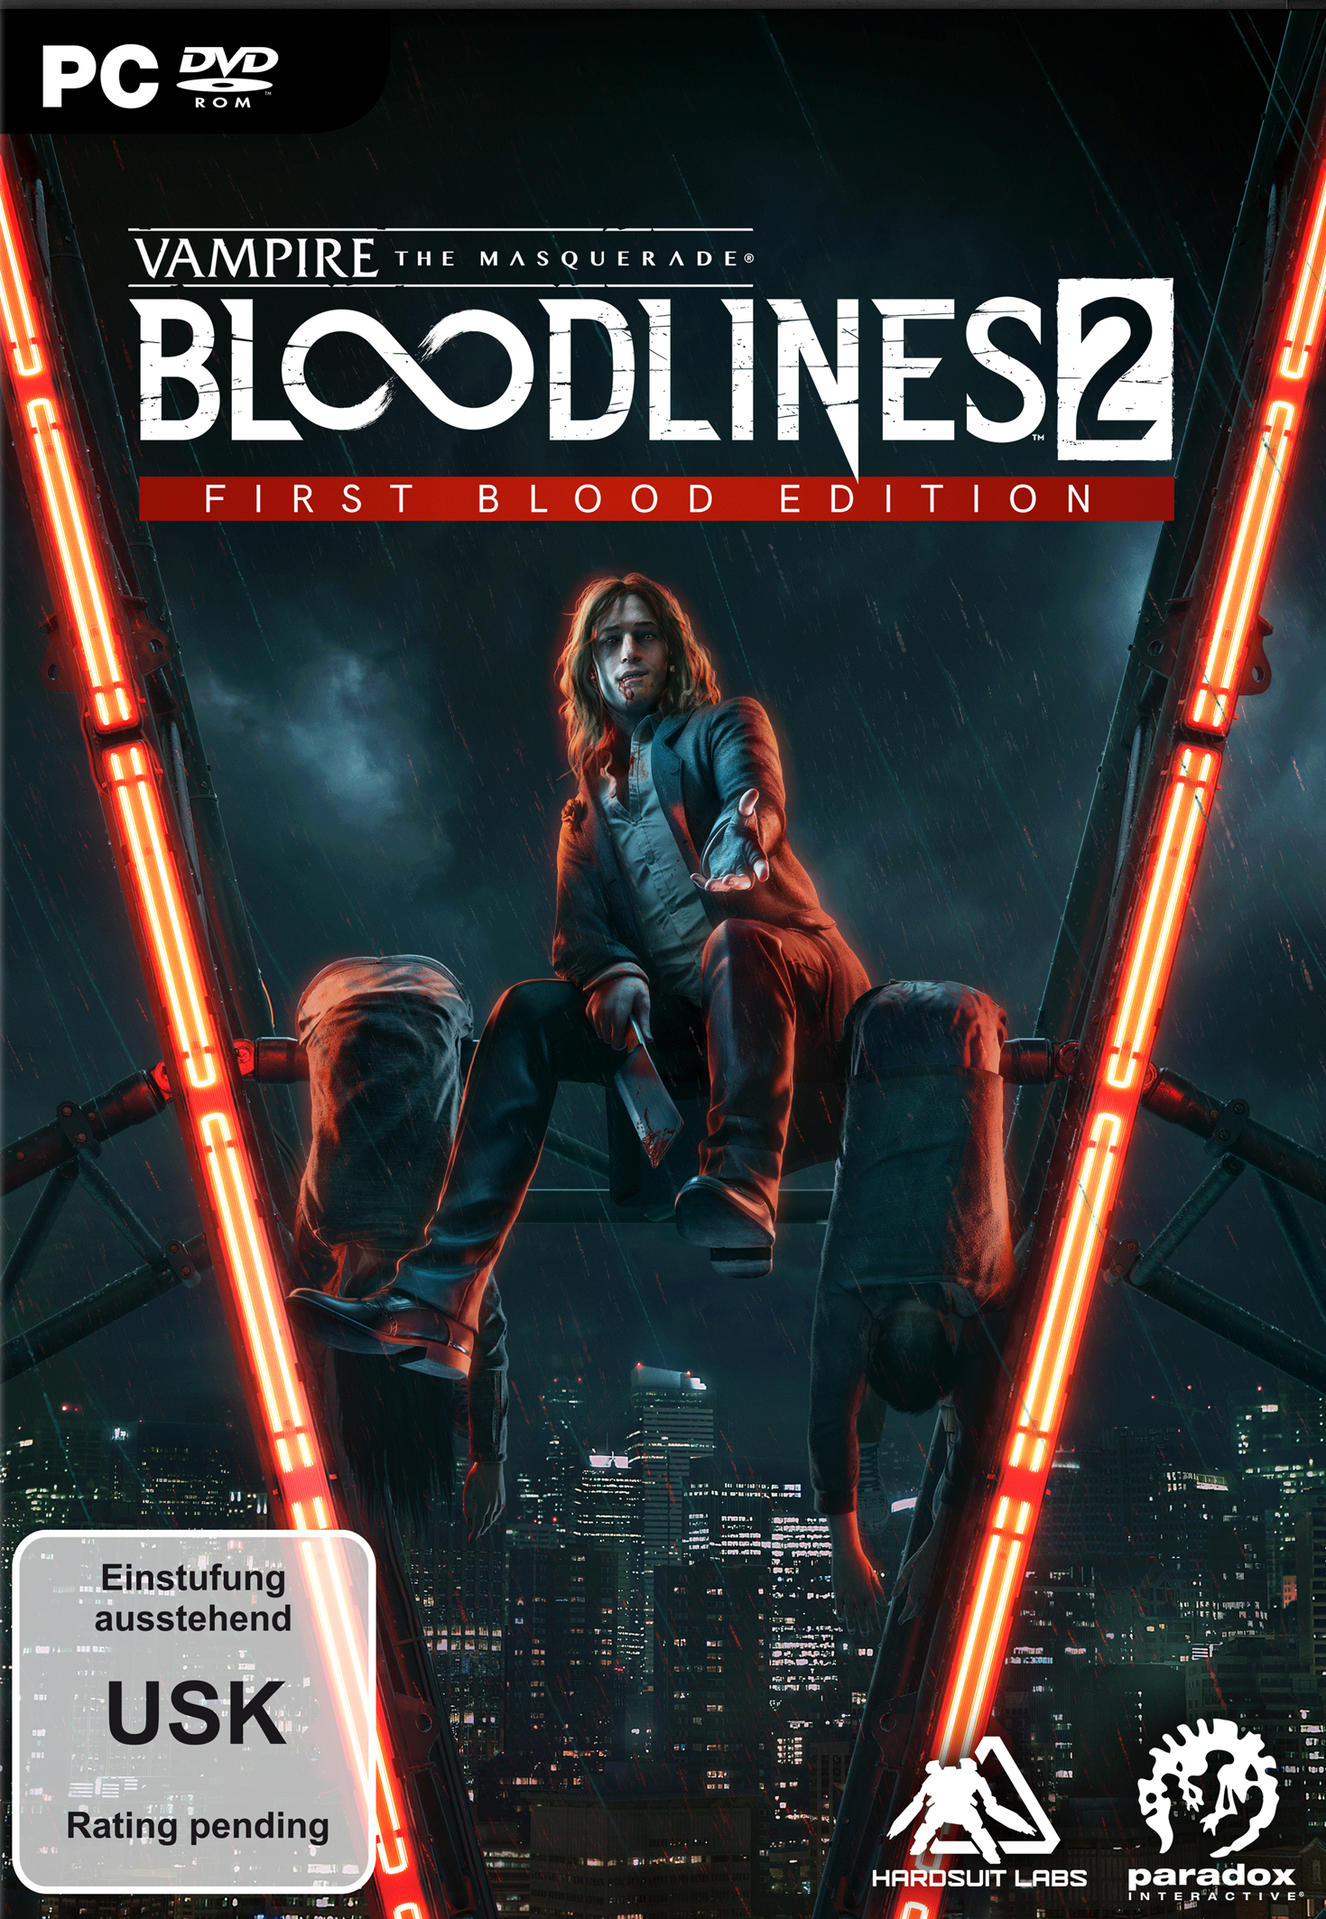 The Vampire: First [PC] Edition Blood - - Bloodlines 2 Masquerade